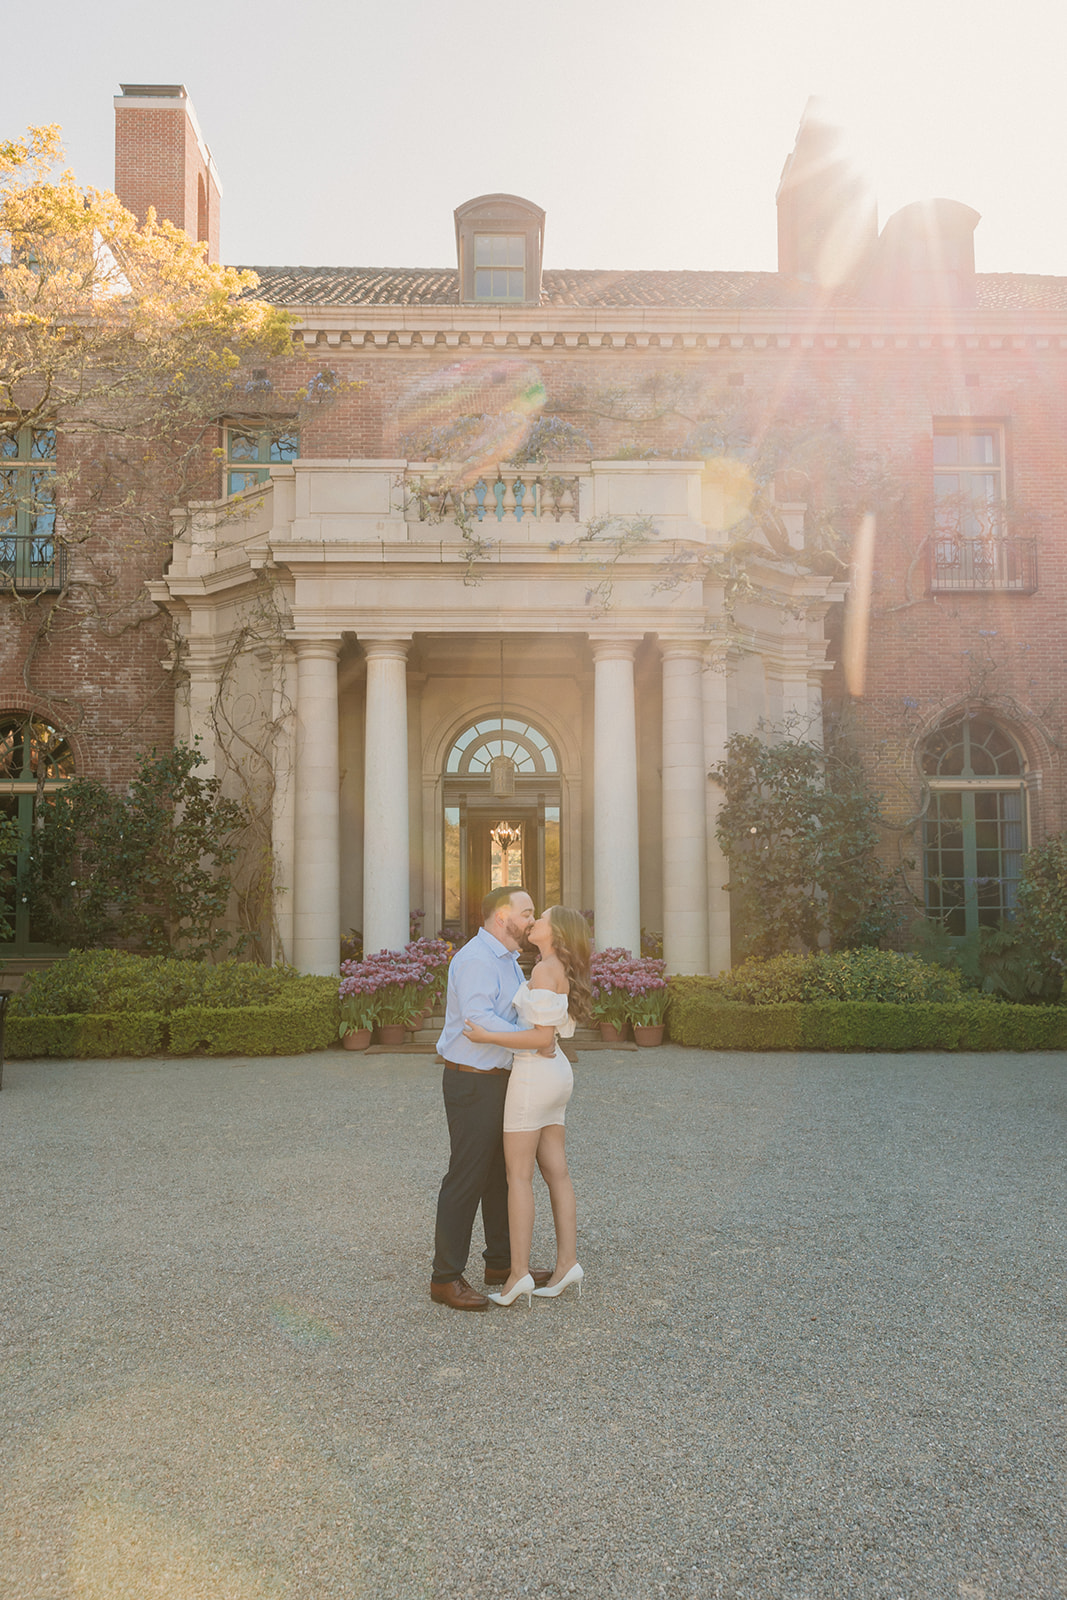 A couple embraces and kisses in front of a large historic building with sunlight streaming in from the top right corner.